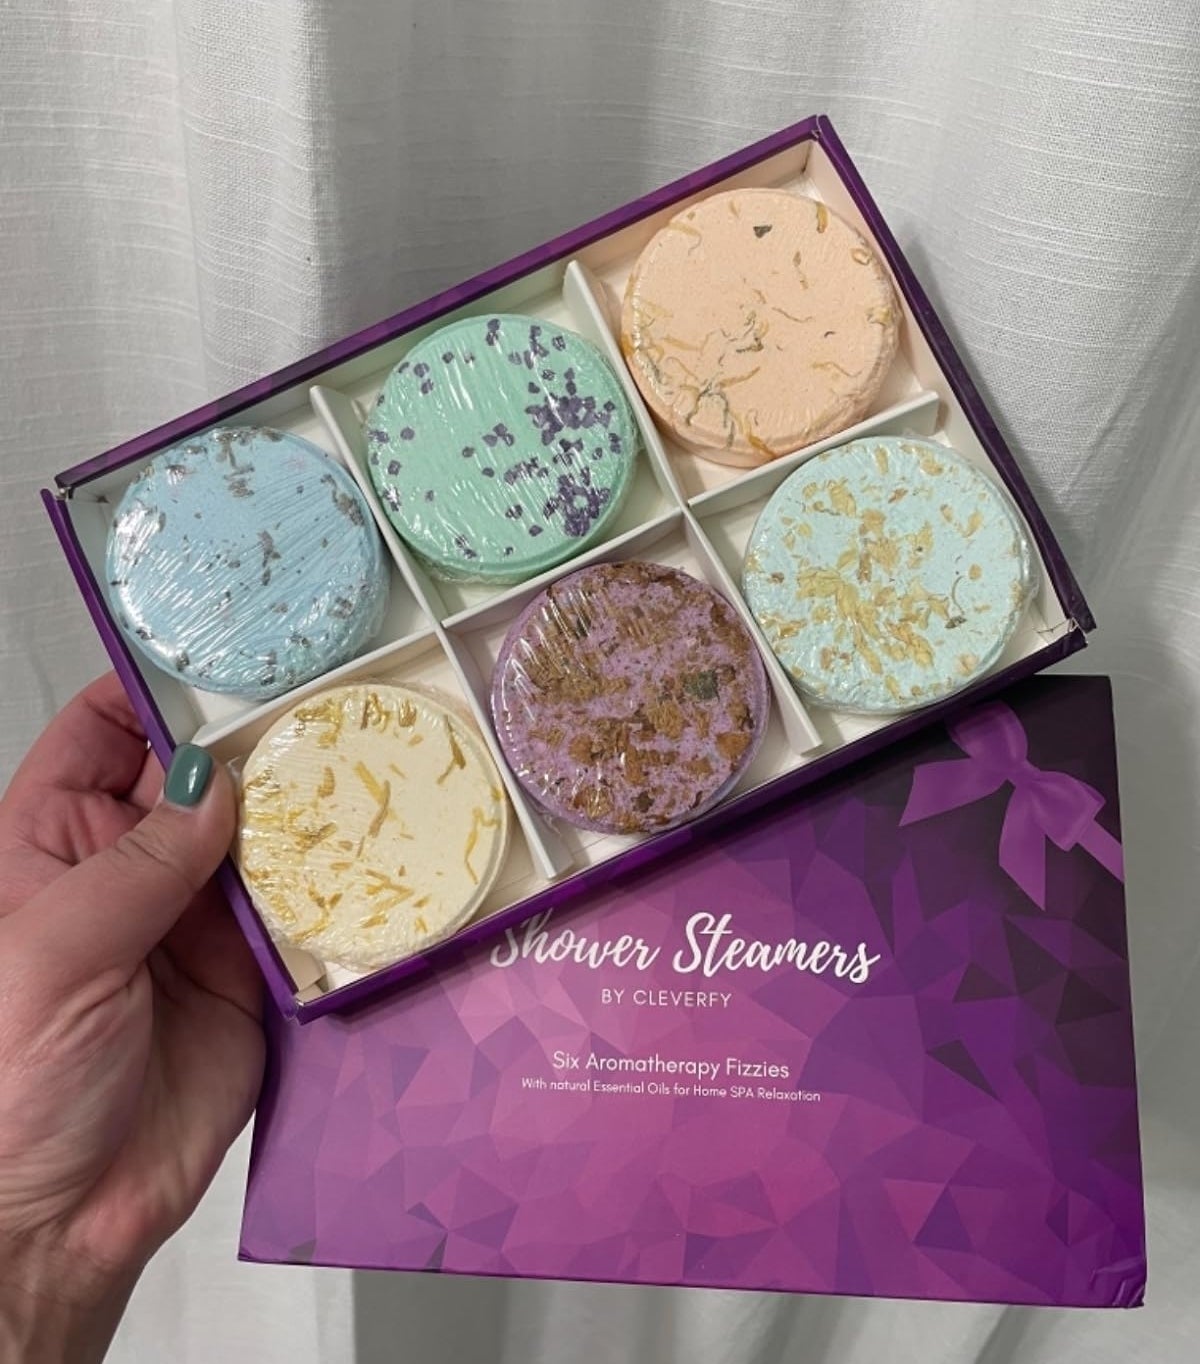 Hand holding a box of six shower steamers with various textures, labeled &quot;Shower Streamers by Clevery.&quot;